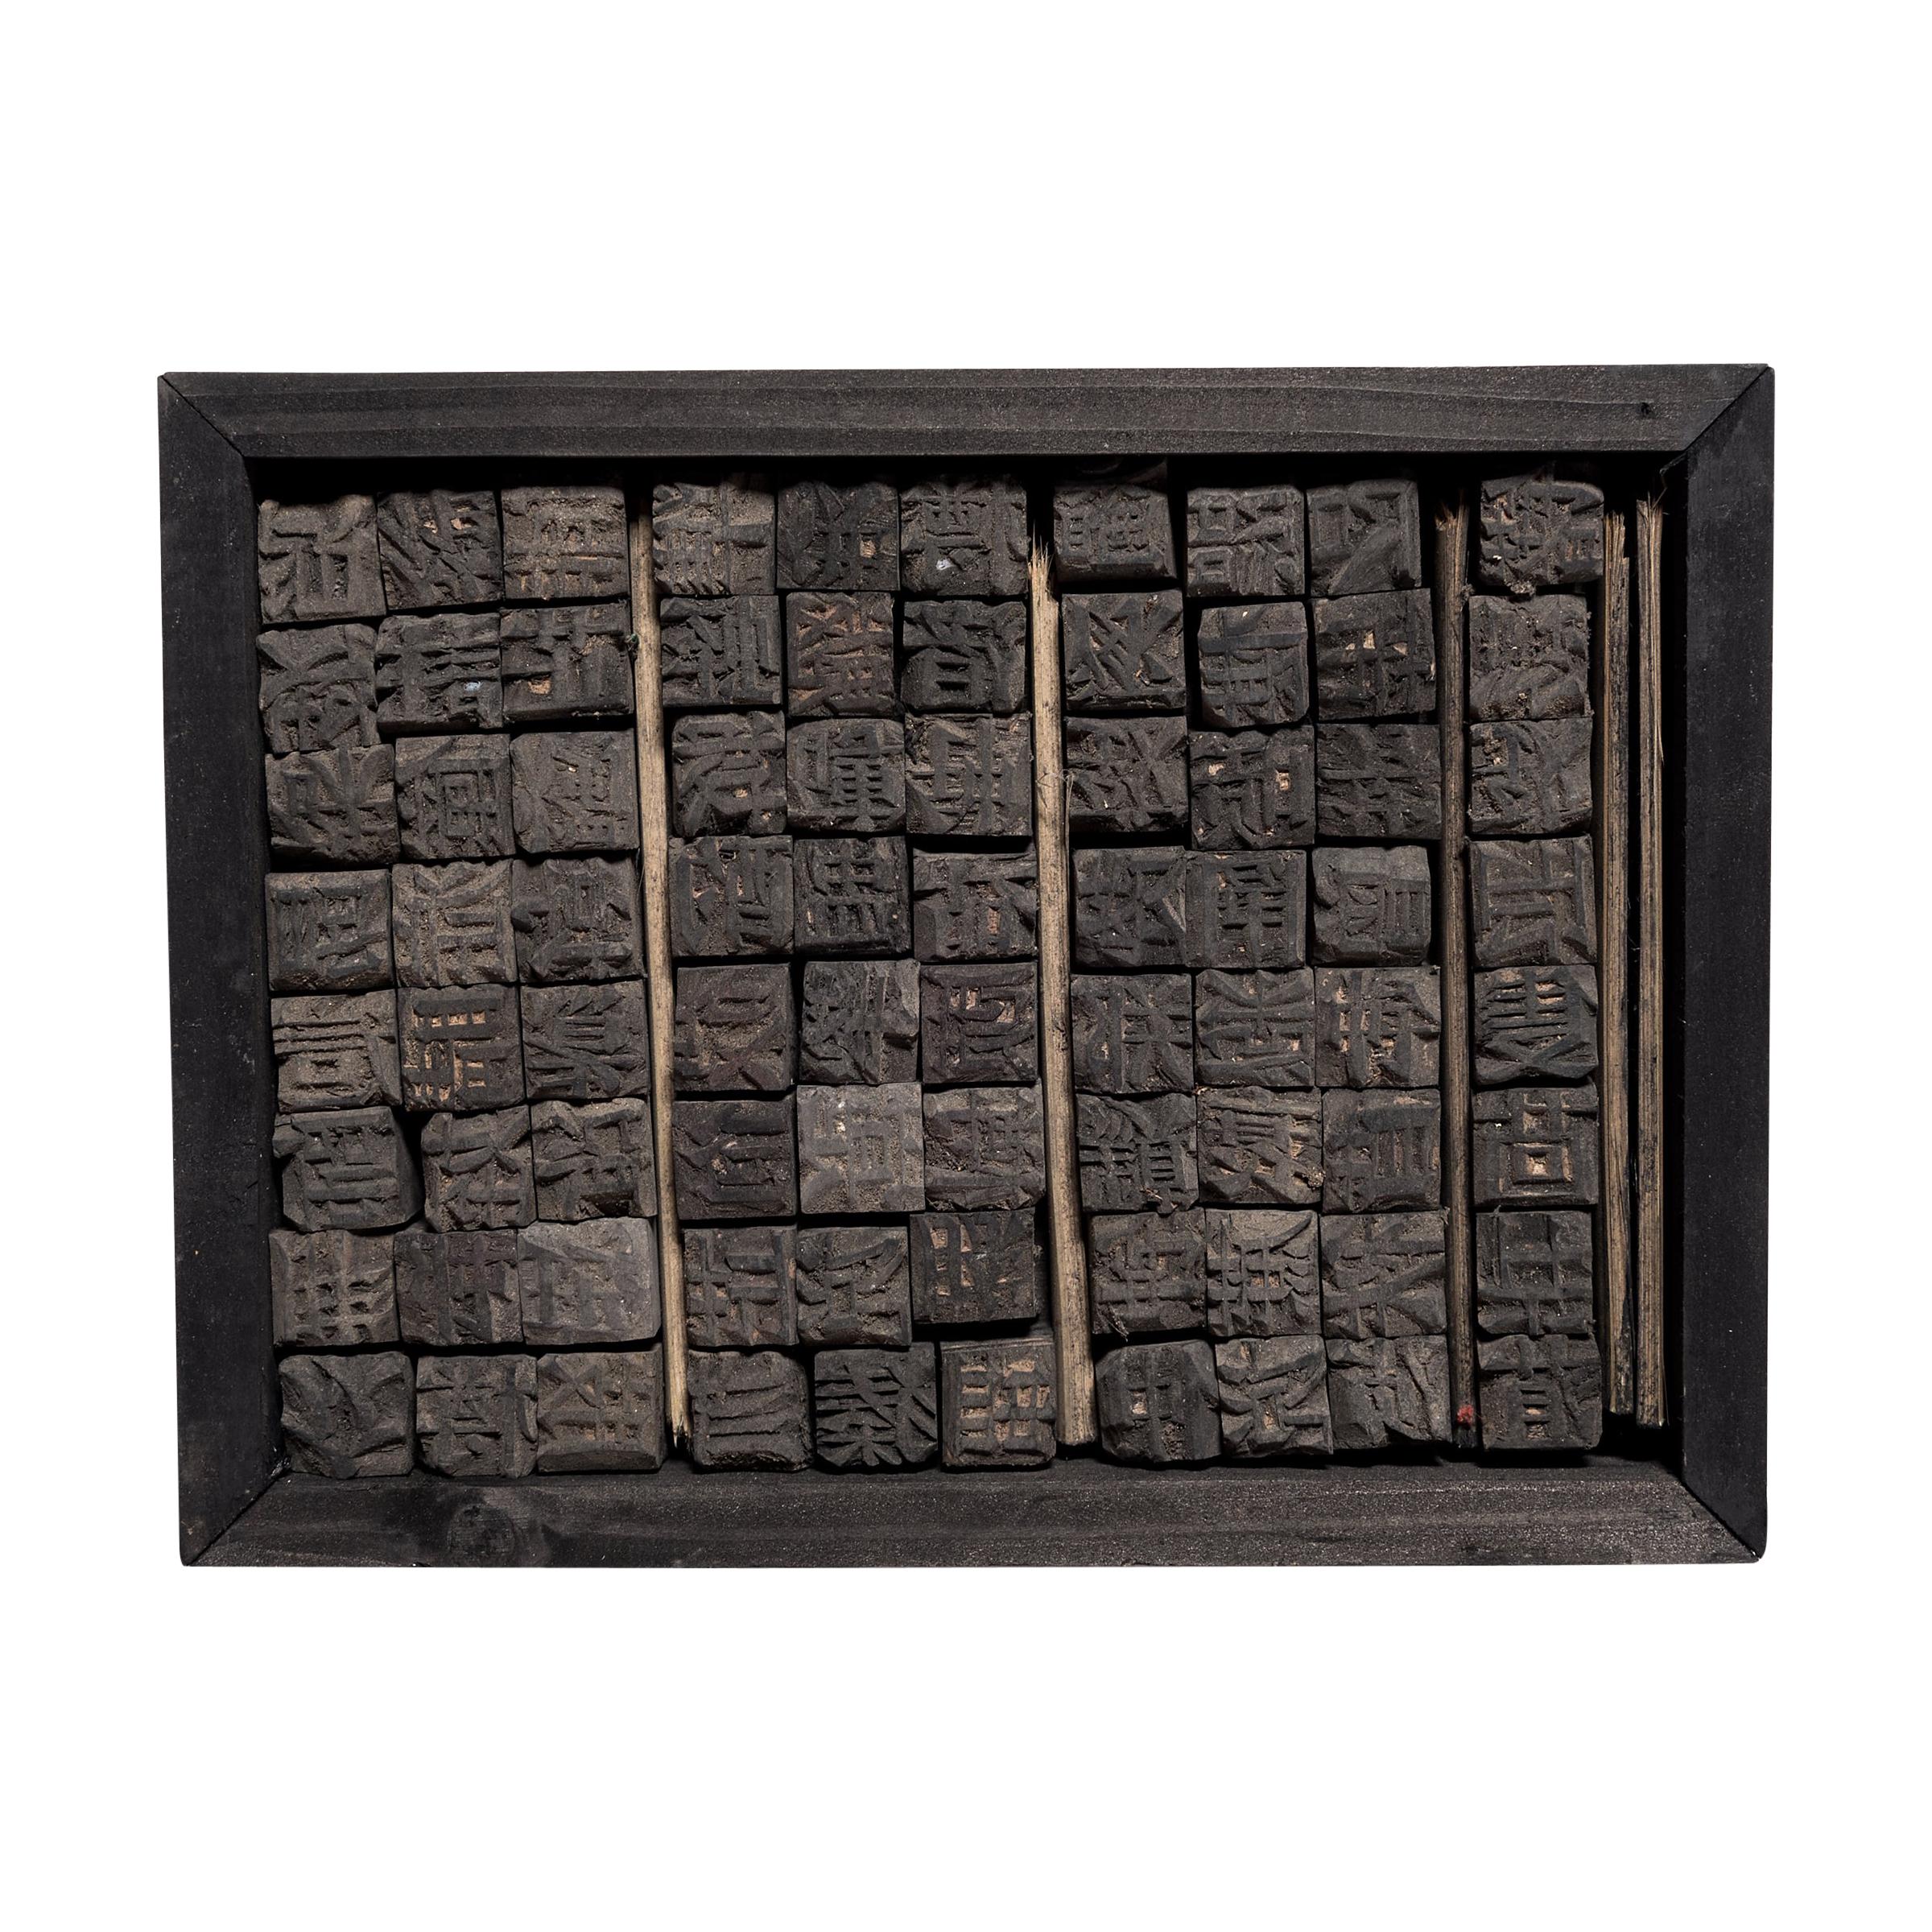 Set of Early 20th Century Chinese Wooden Printing Blocks